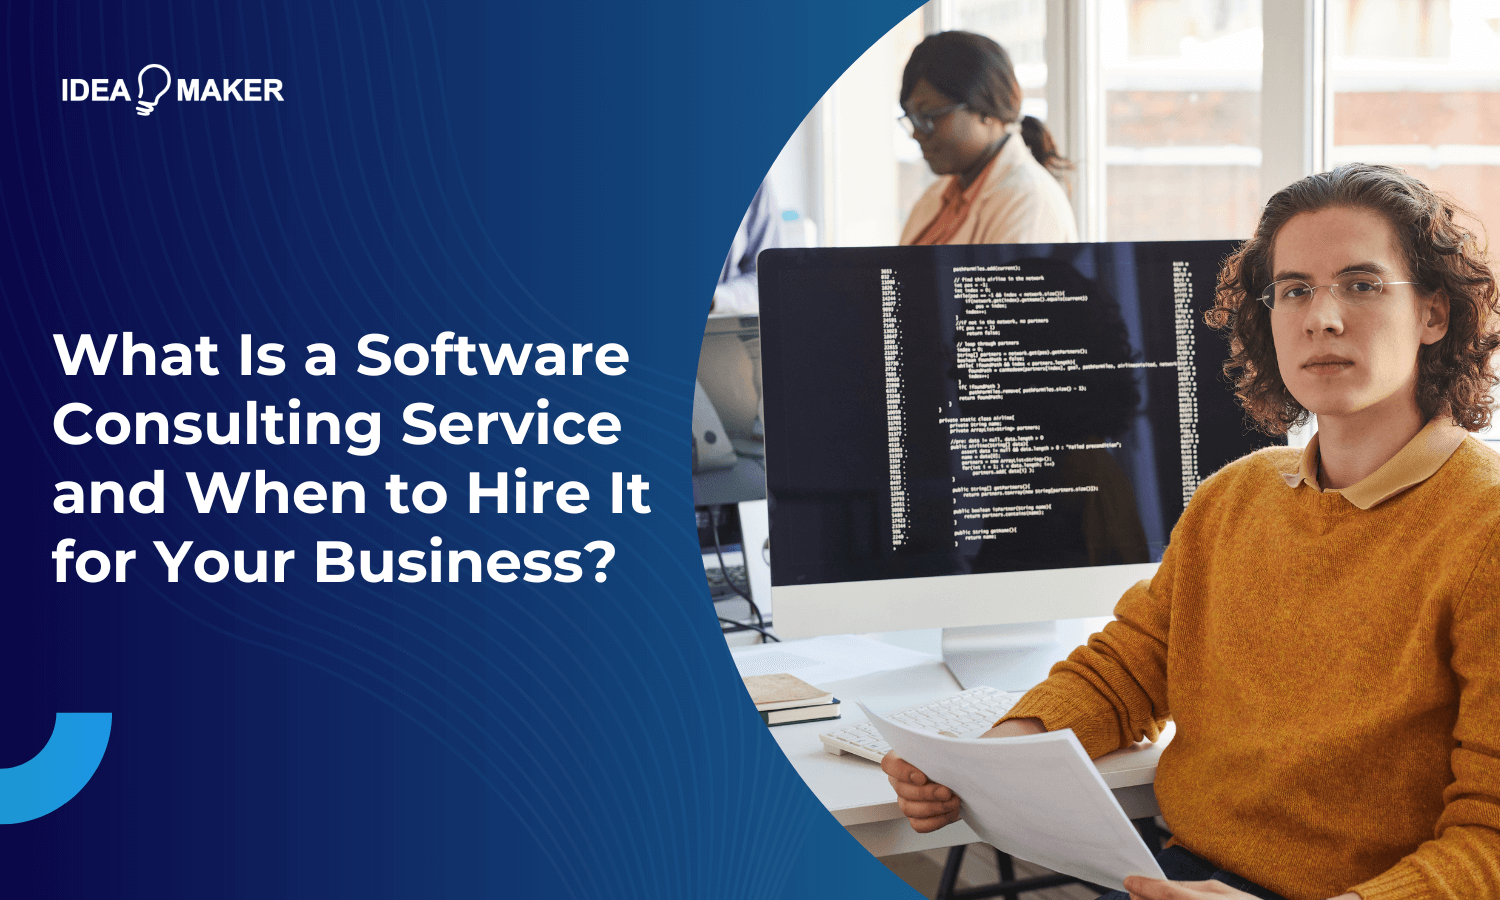 What Is a Software Consulting Service and When to Hire It for Your Business